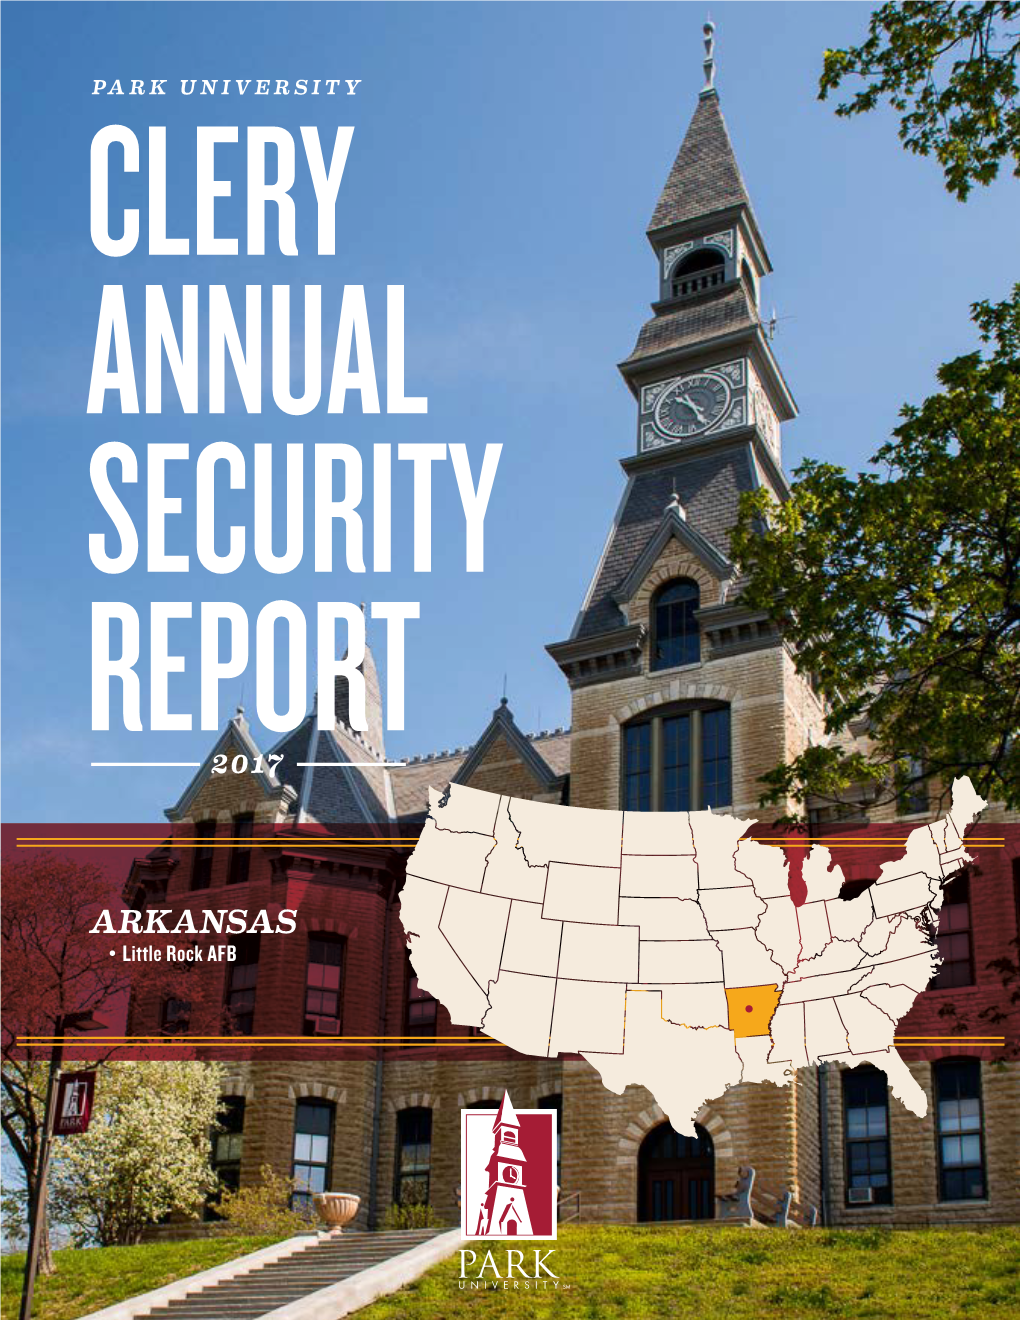 Park University Clery Annual Security Report